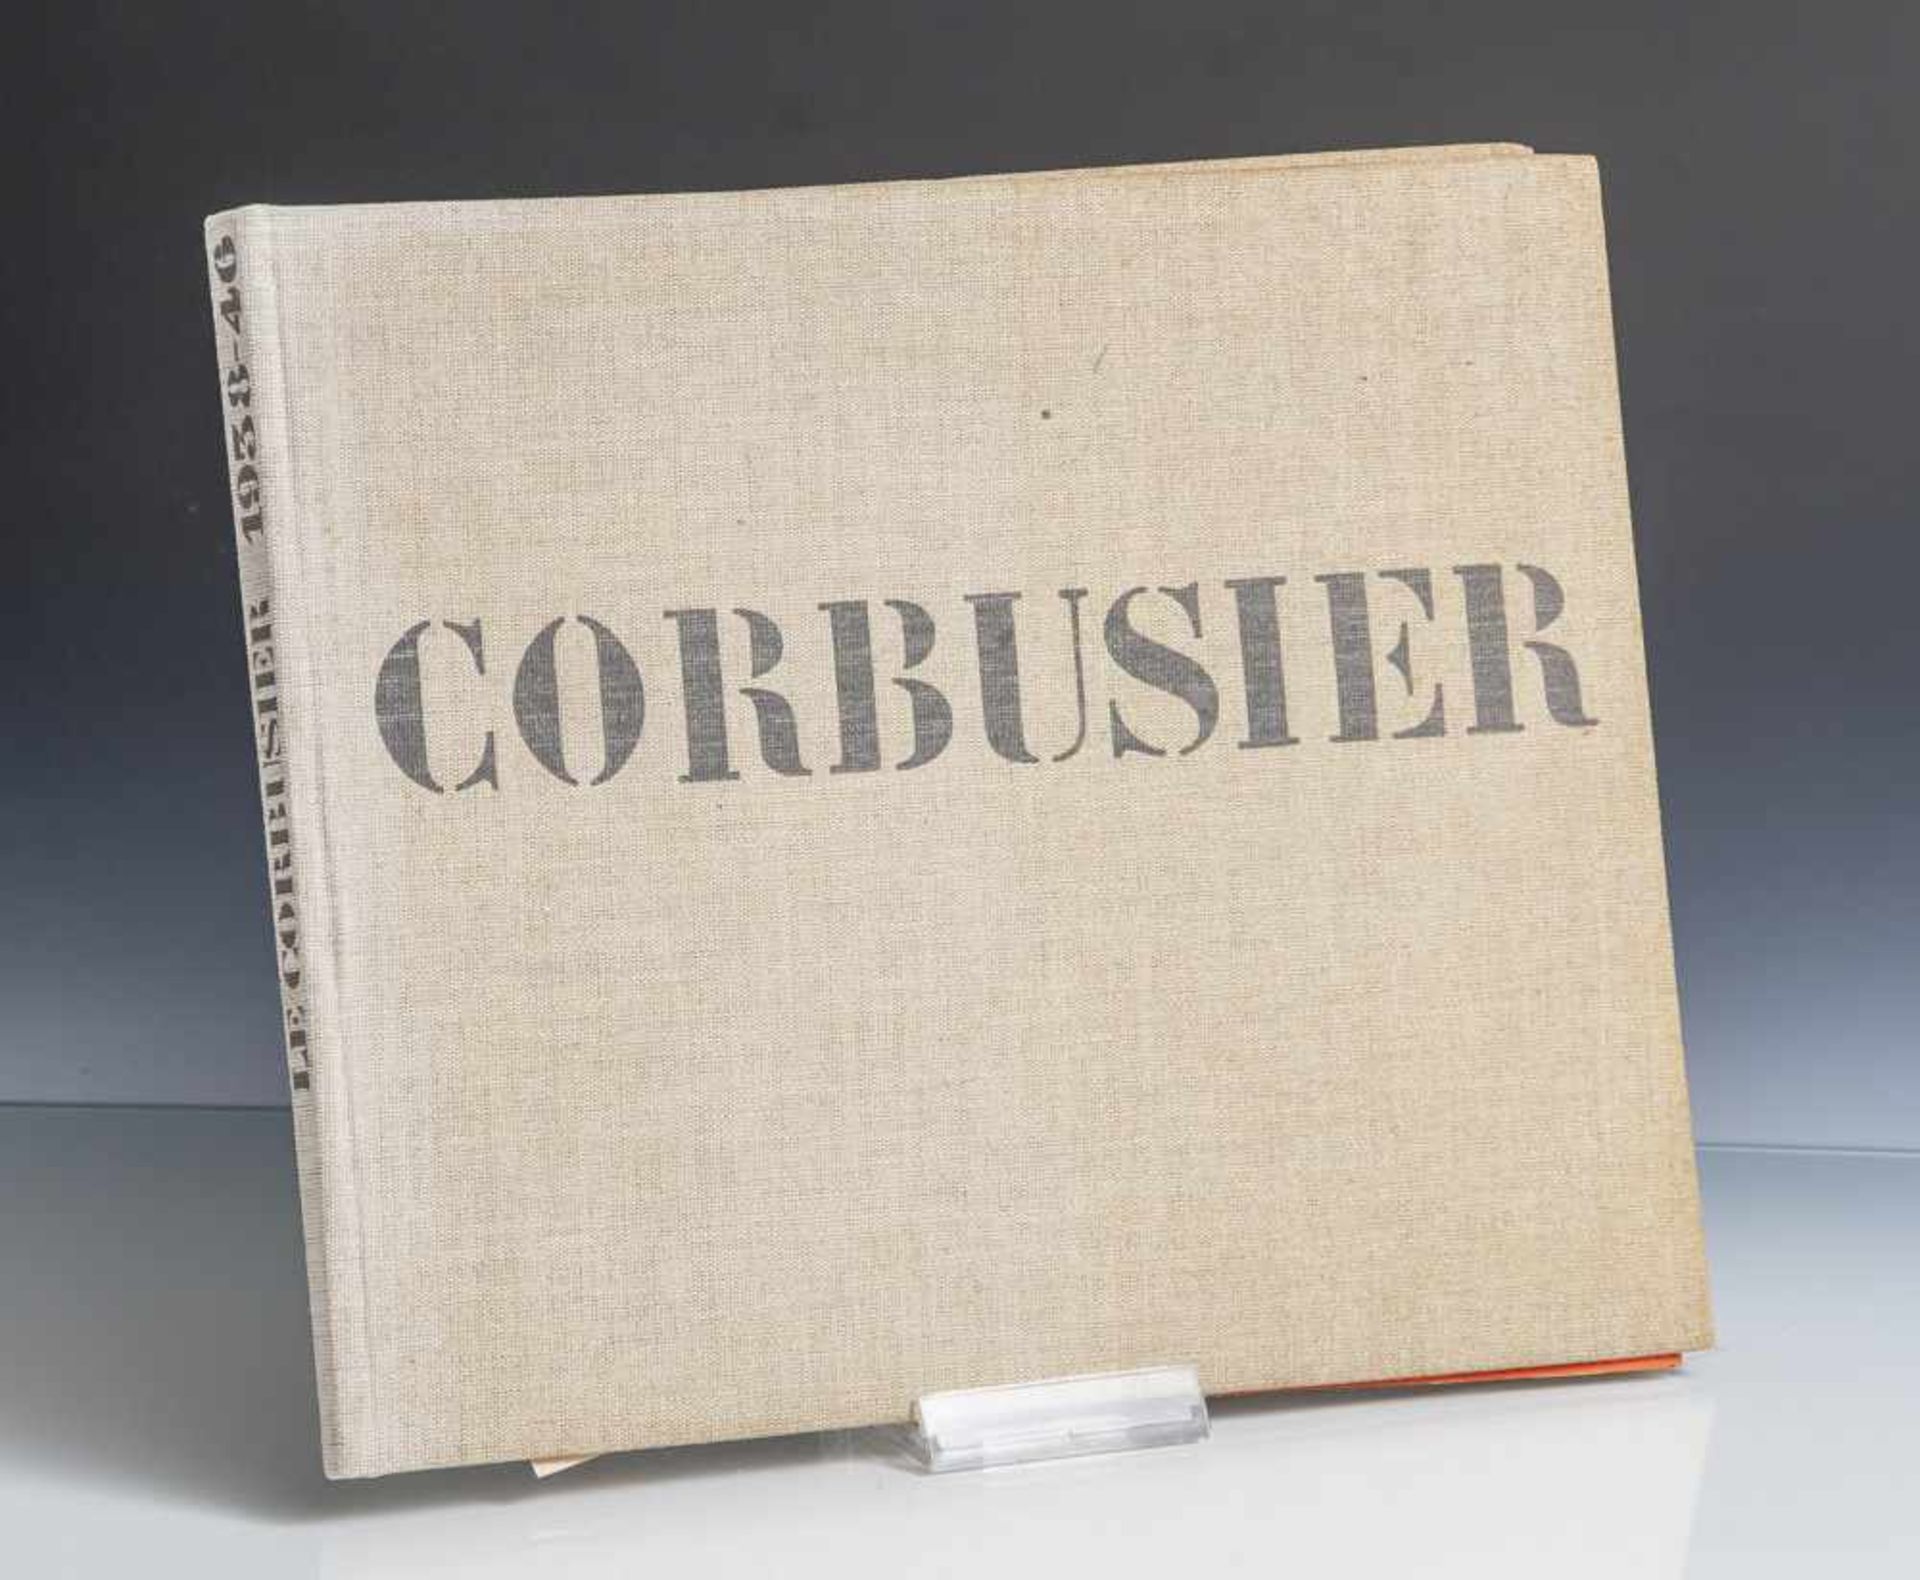 Boesiger, Willy: "Le Corbusier. Oeuvre complète 1938-1946", Les Editions d'Architecture Erlenbach-